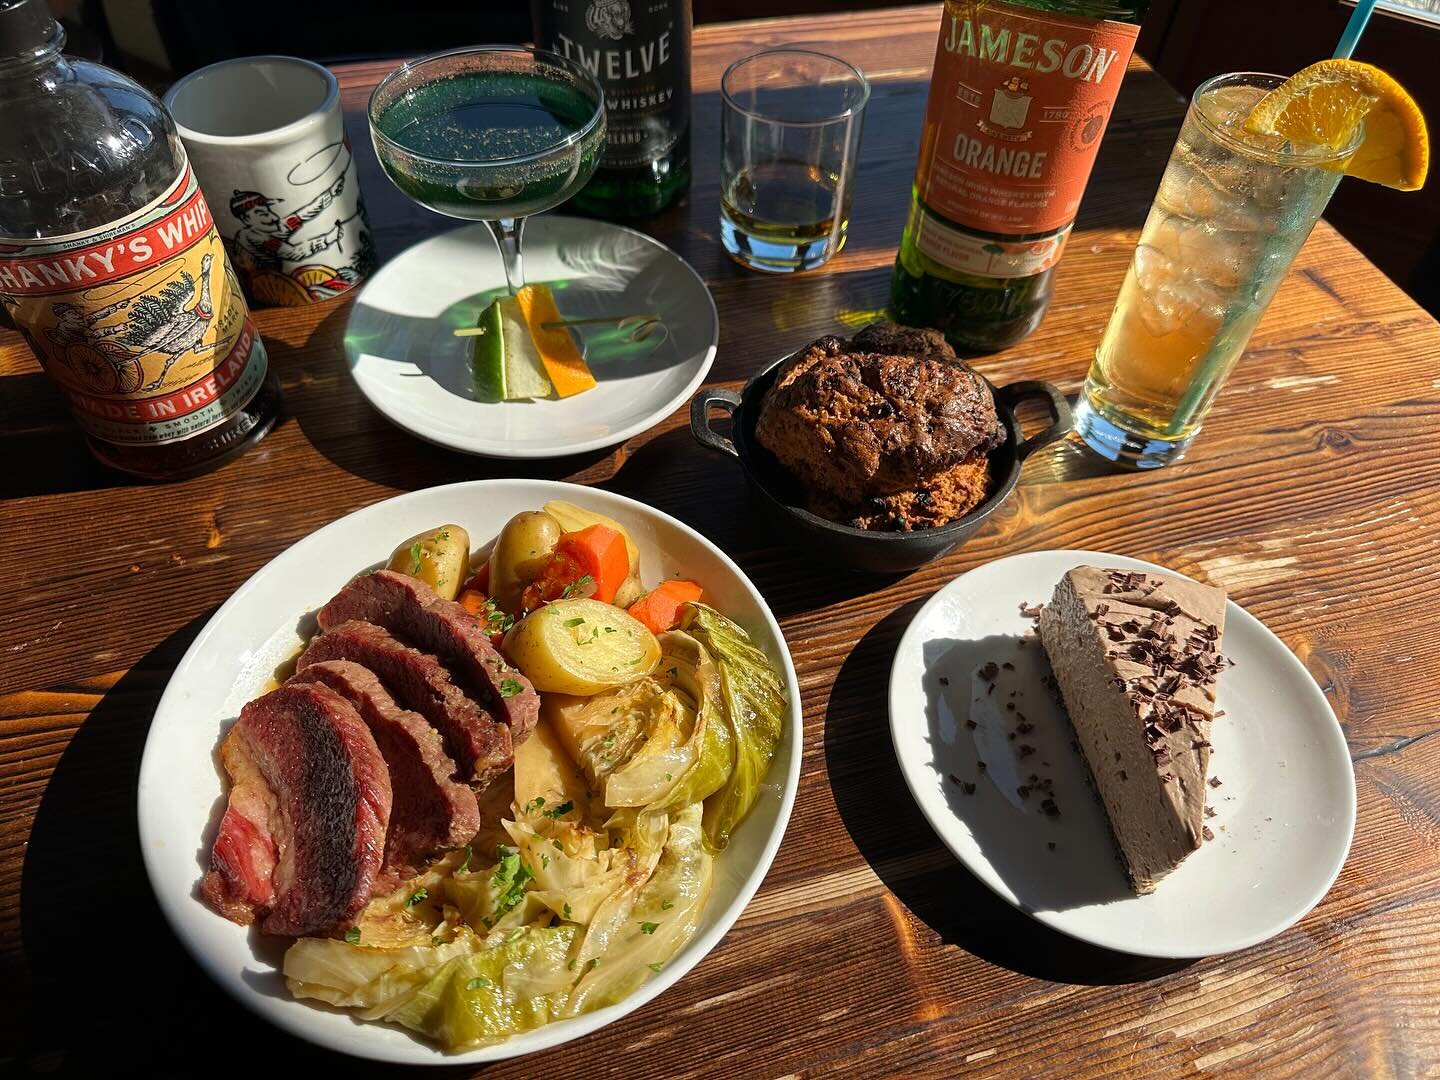 Our first name is Patrick!  Of course we&rsquo;re celebrating St Paddy&rsquo;s day on the river !  Enjoy our delicious, slow cooked corned beef and cabbage, @guinnessus @properwhiskey @jamesonus specials, @baileysofficial  cheesecake and more!  Bag p